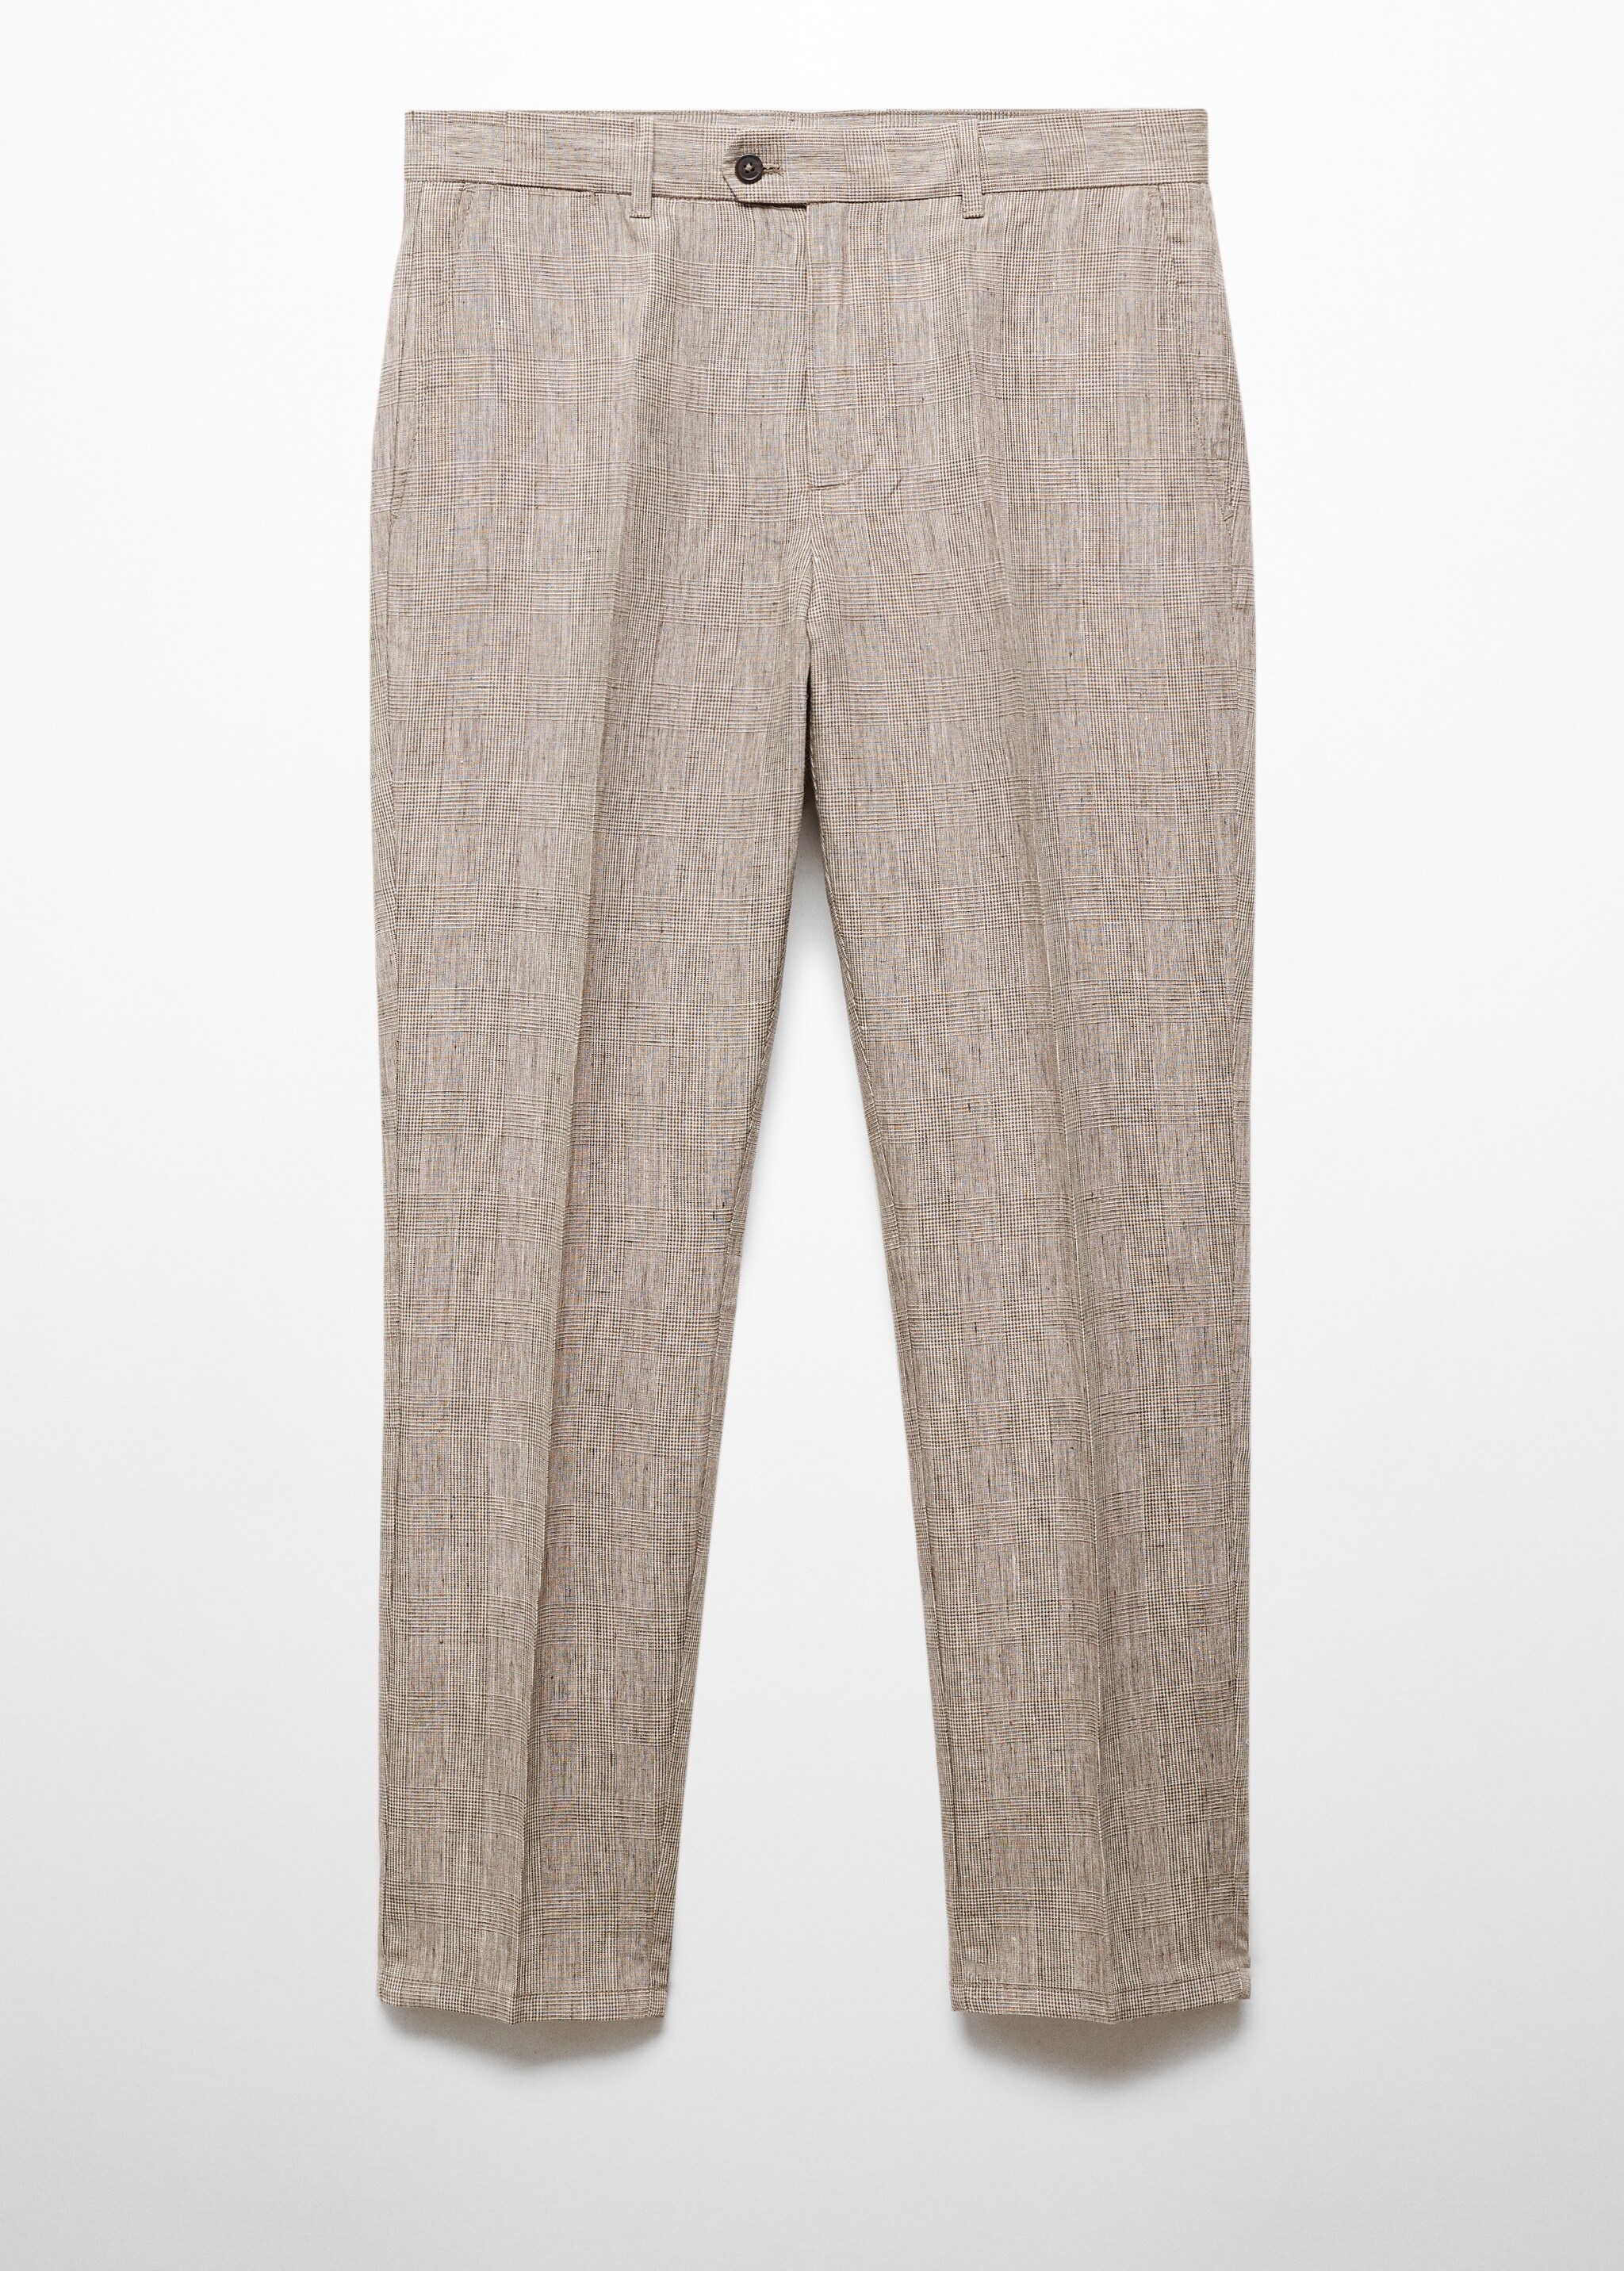 100% linen Prince of Wales check pants - Article without model